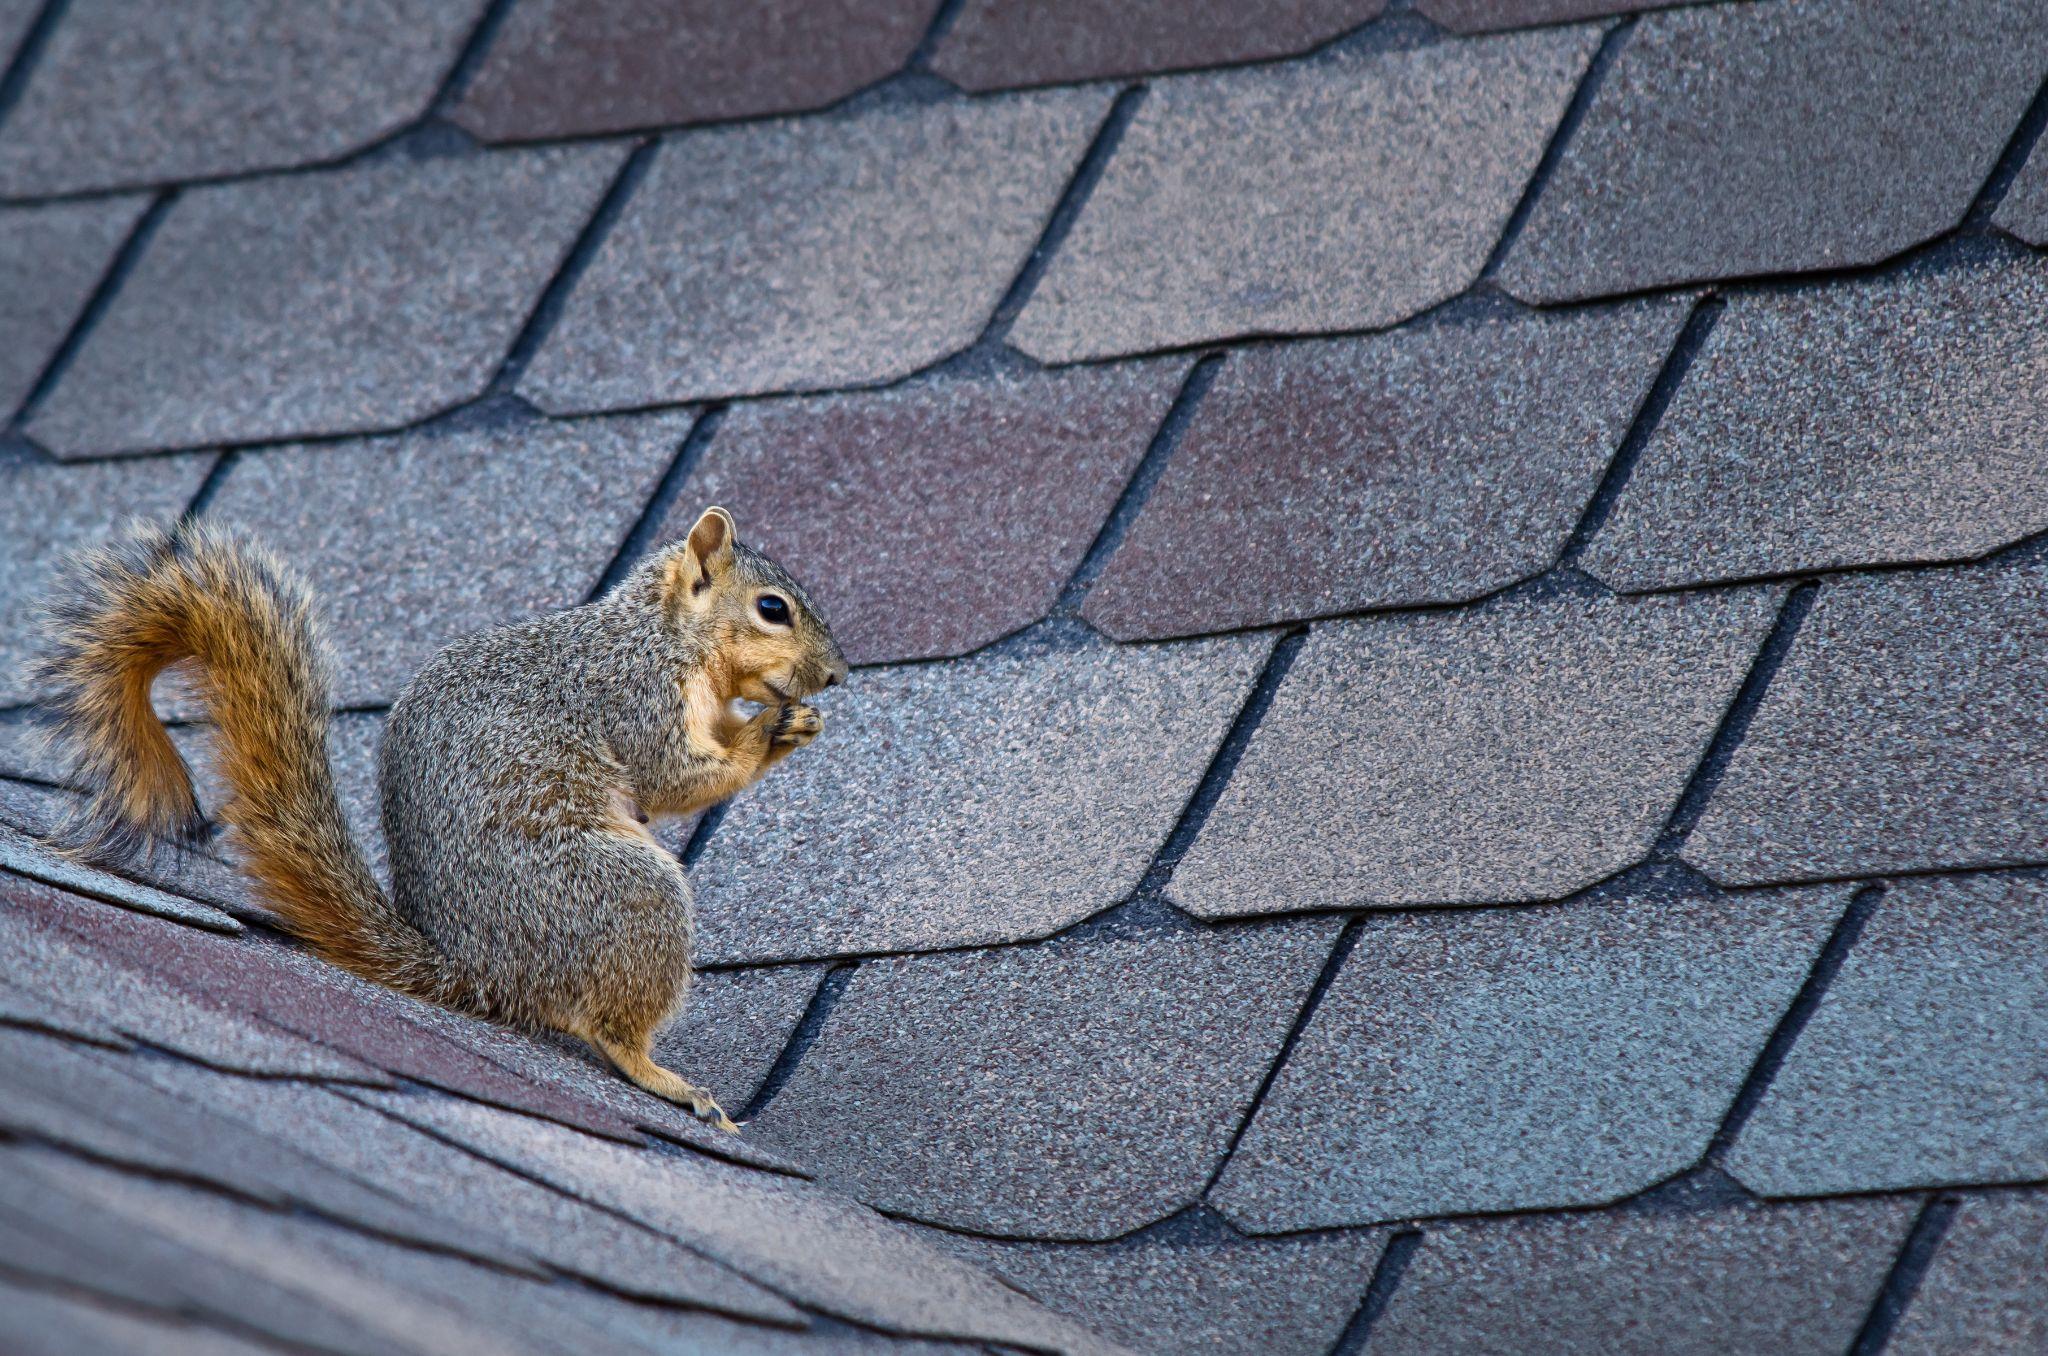 A squirrel on the roof of a home in Los Angeles.